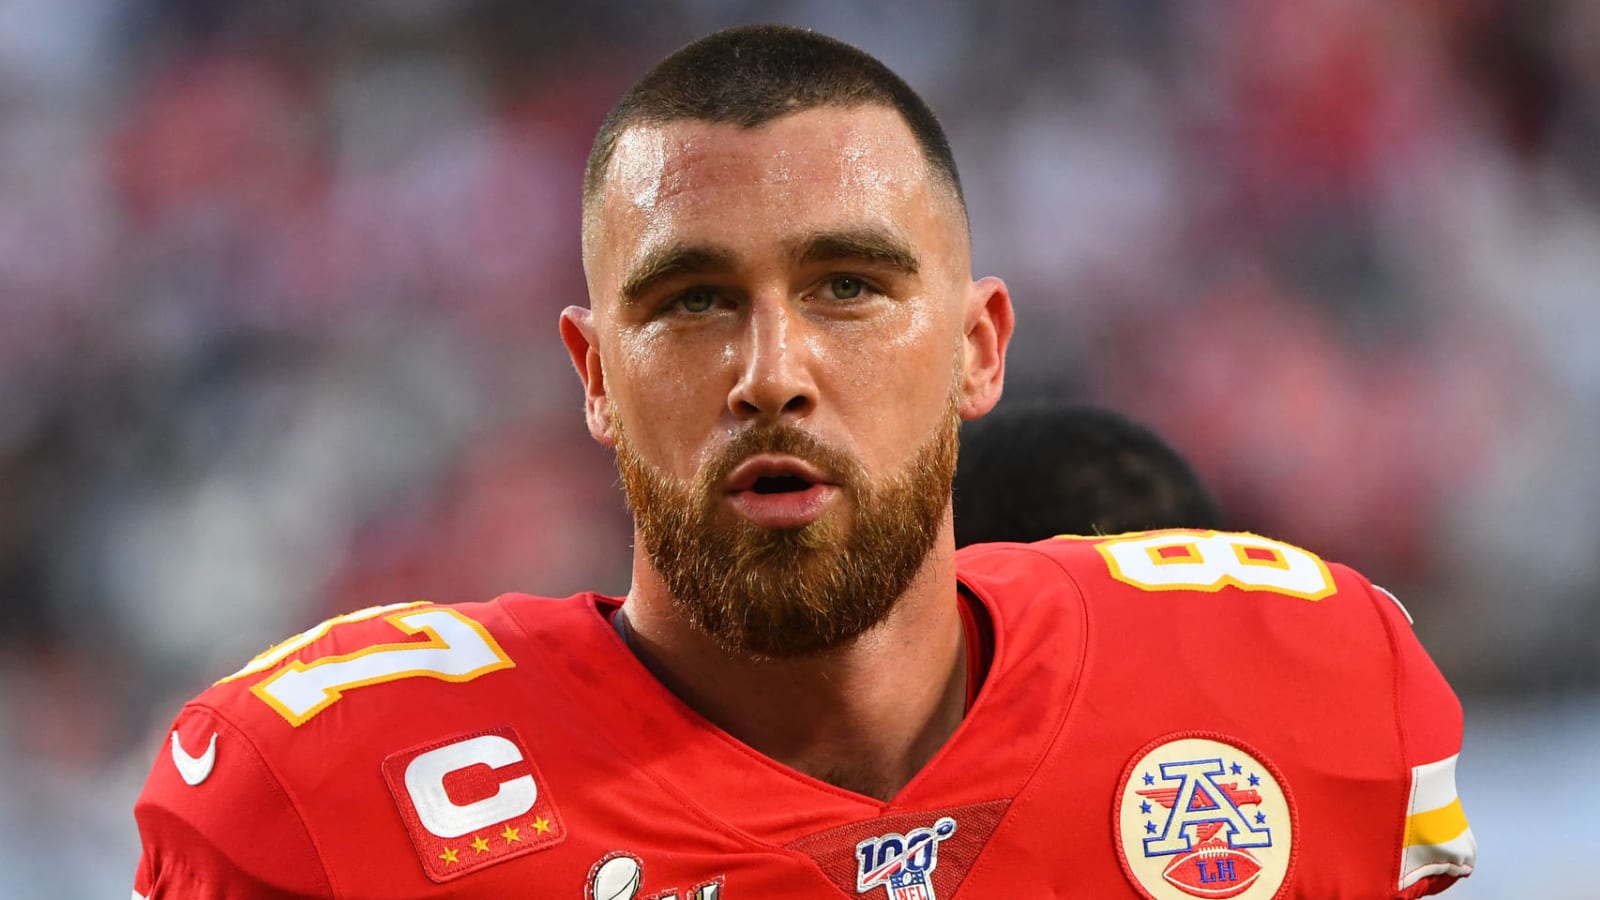 Chiefs' Travis Kelce purchases building to help inner-city students practice STEM